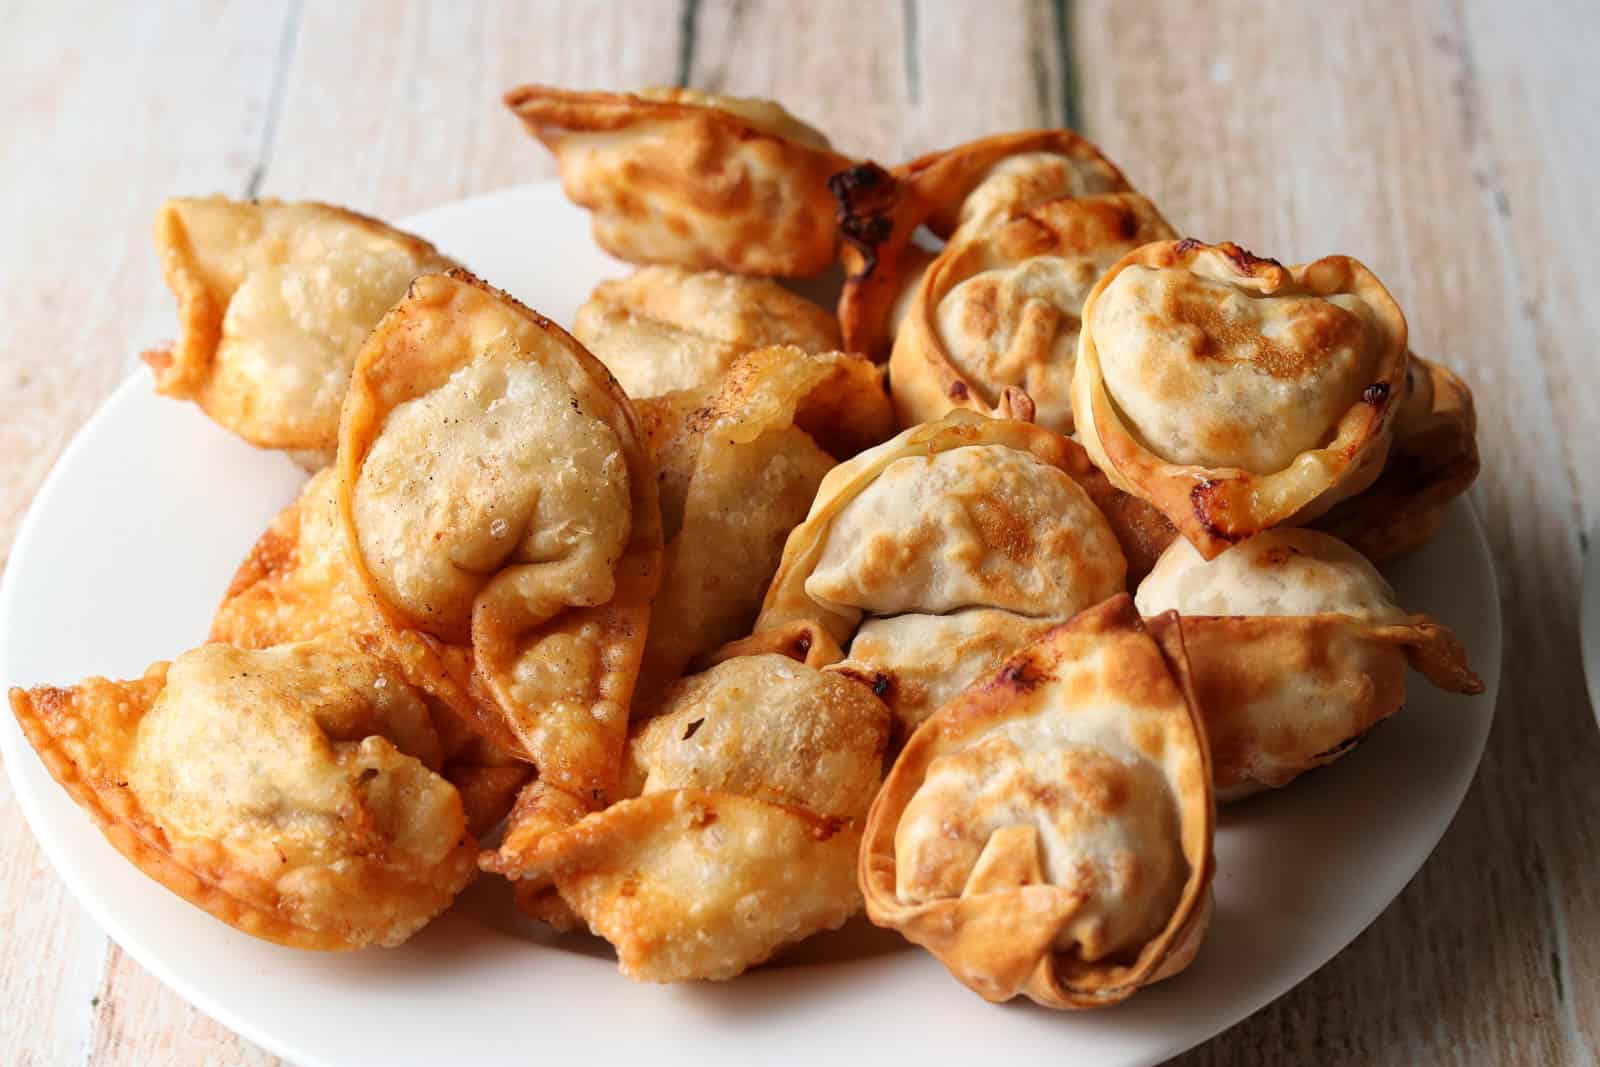 Comparison between fried and air fryer wontons.